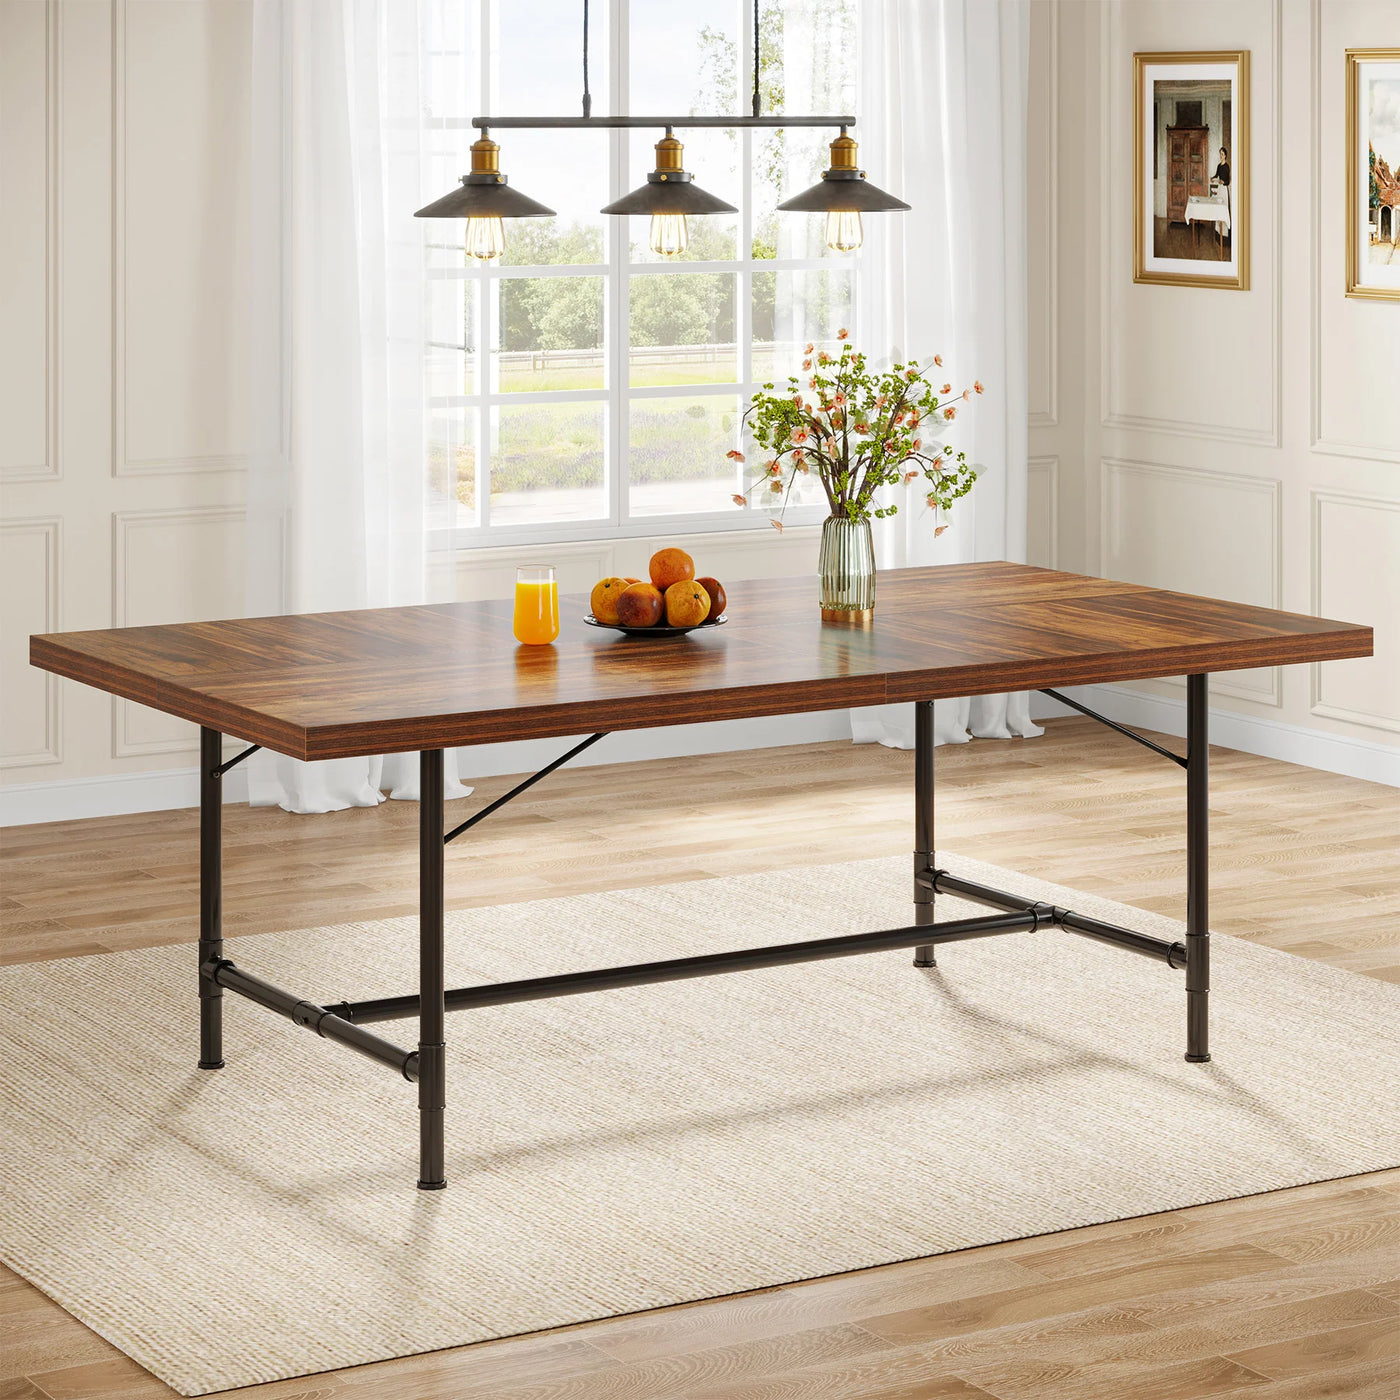 Loin 70.8" Industrial Dining Table Kitchen Table for 6-8 People Wood Black Metal Base